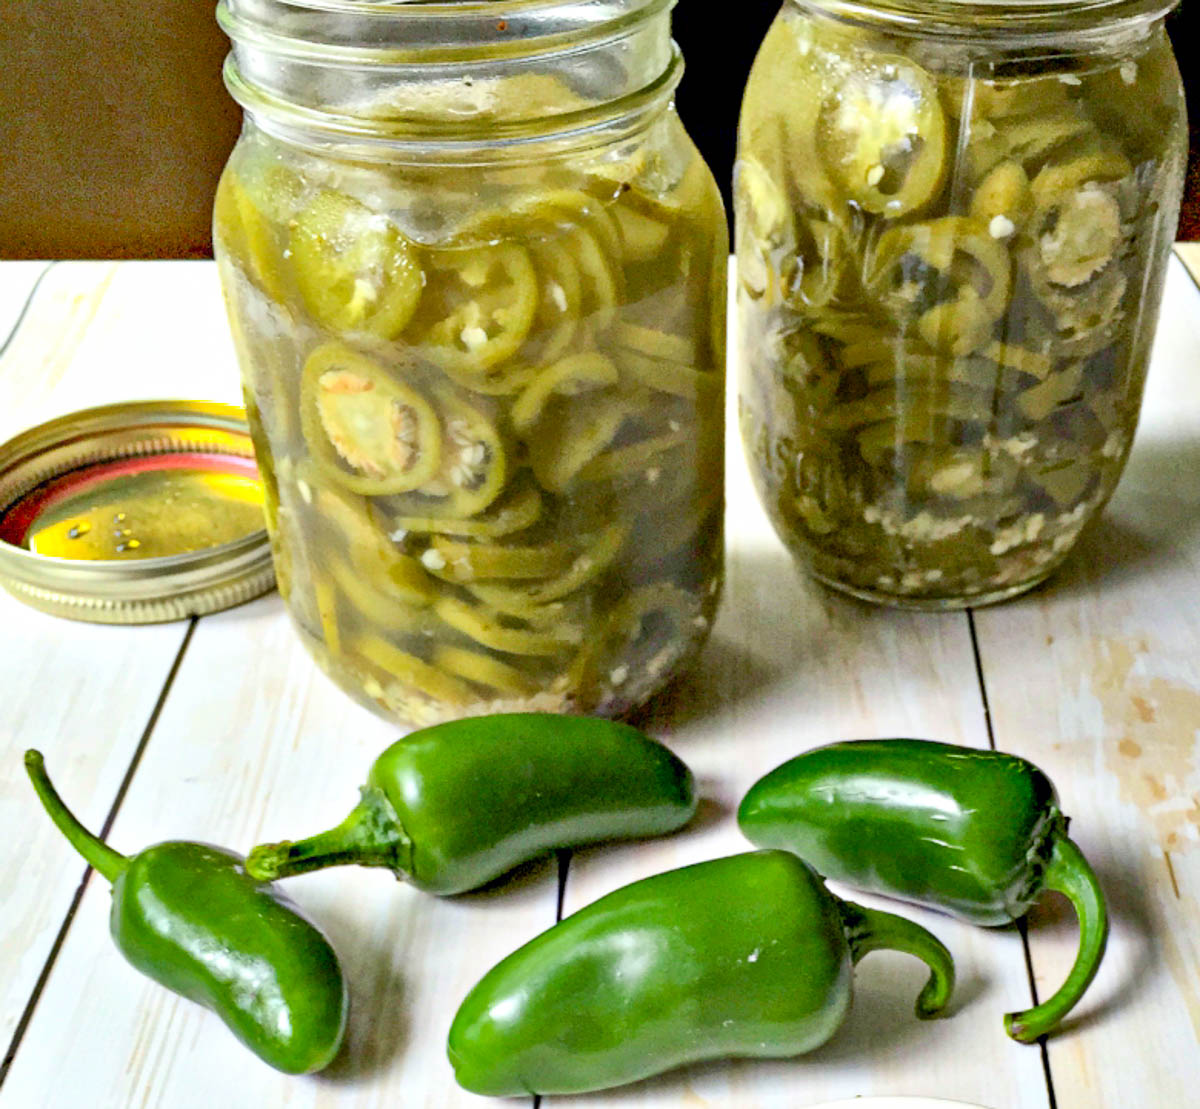 2 jars of homemade pickled jalapeno peppers and a few raw peppers in front of them